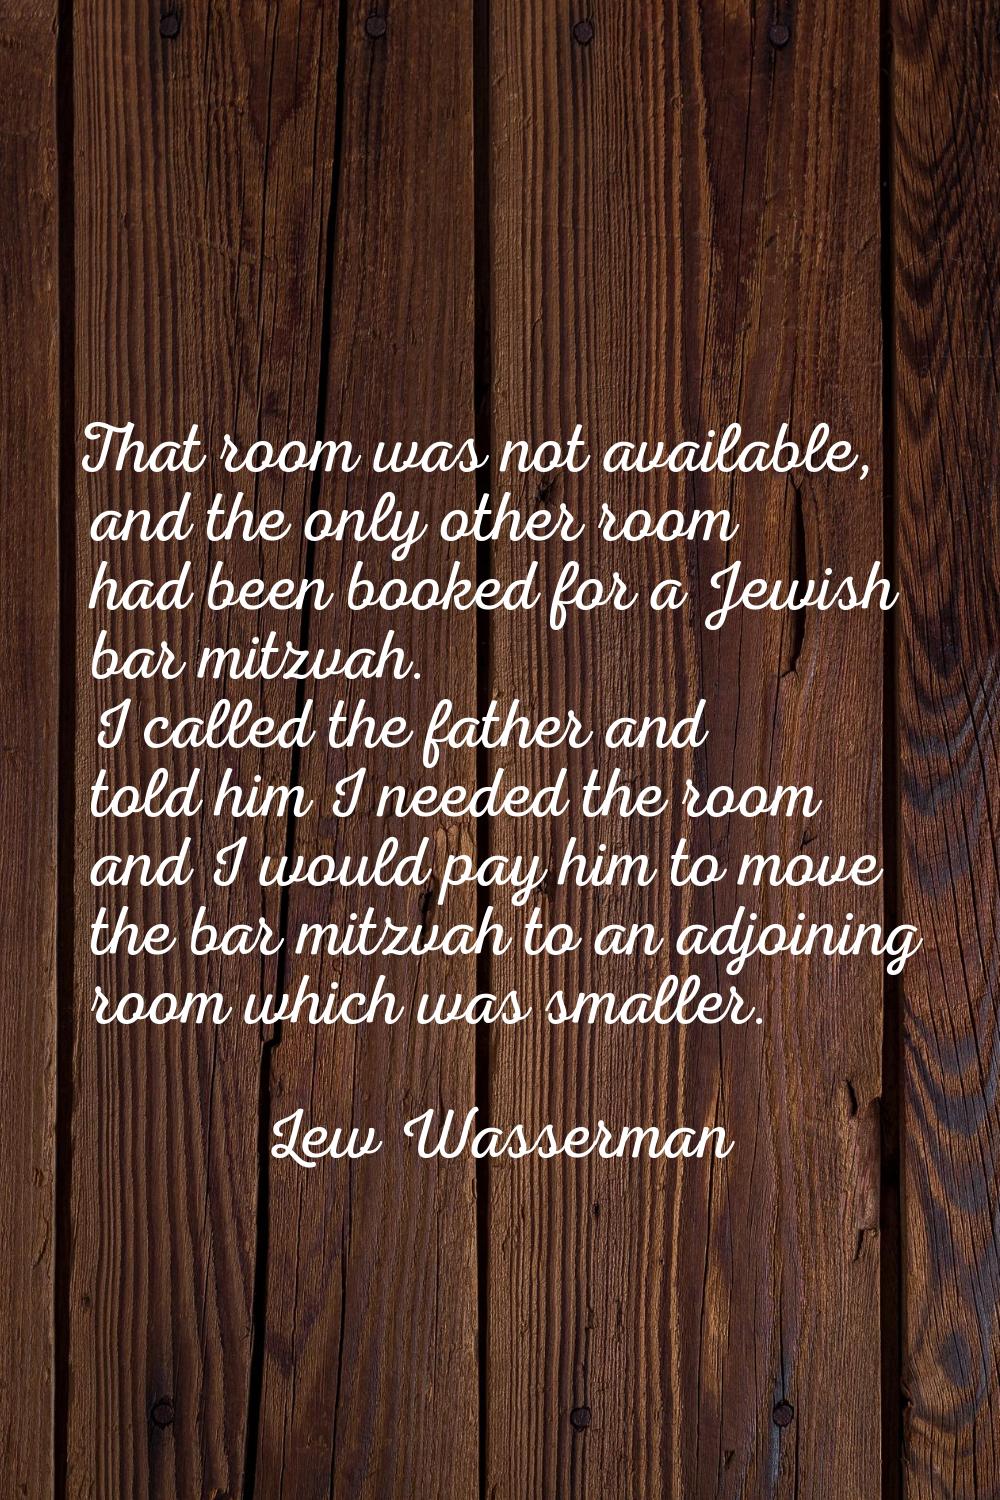 That room was not available, and the only other room had been booked for a Jewish bar mitzvah. I ca